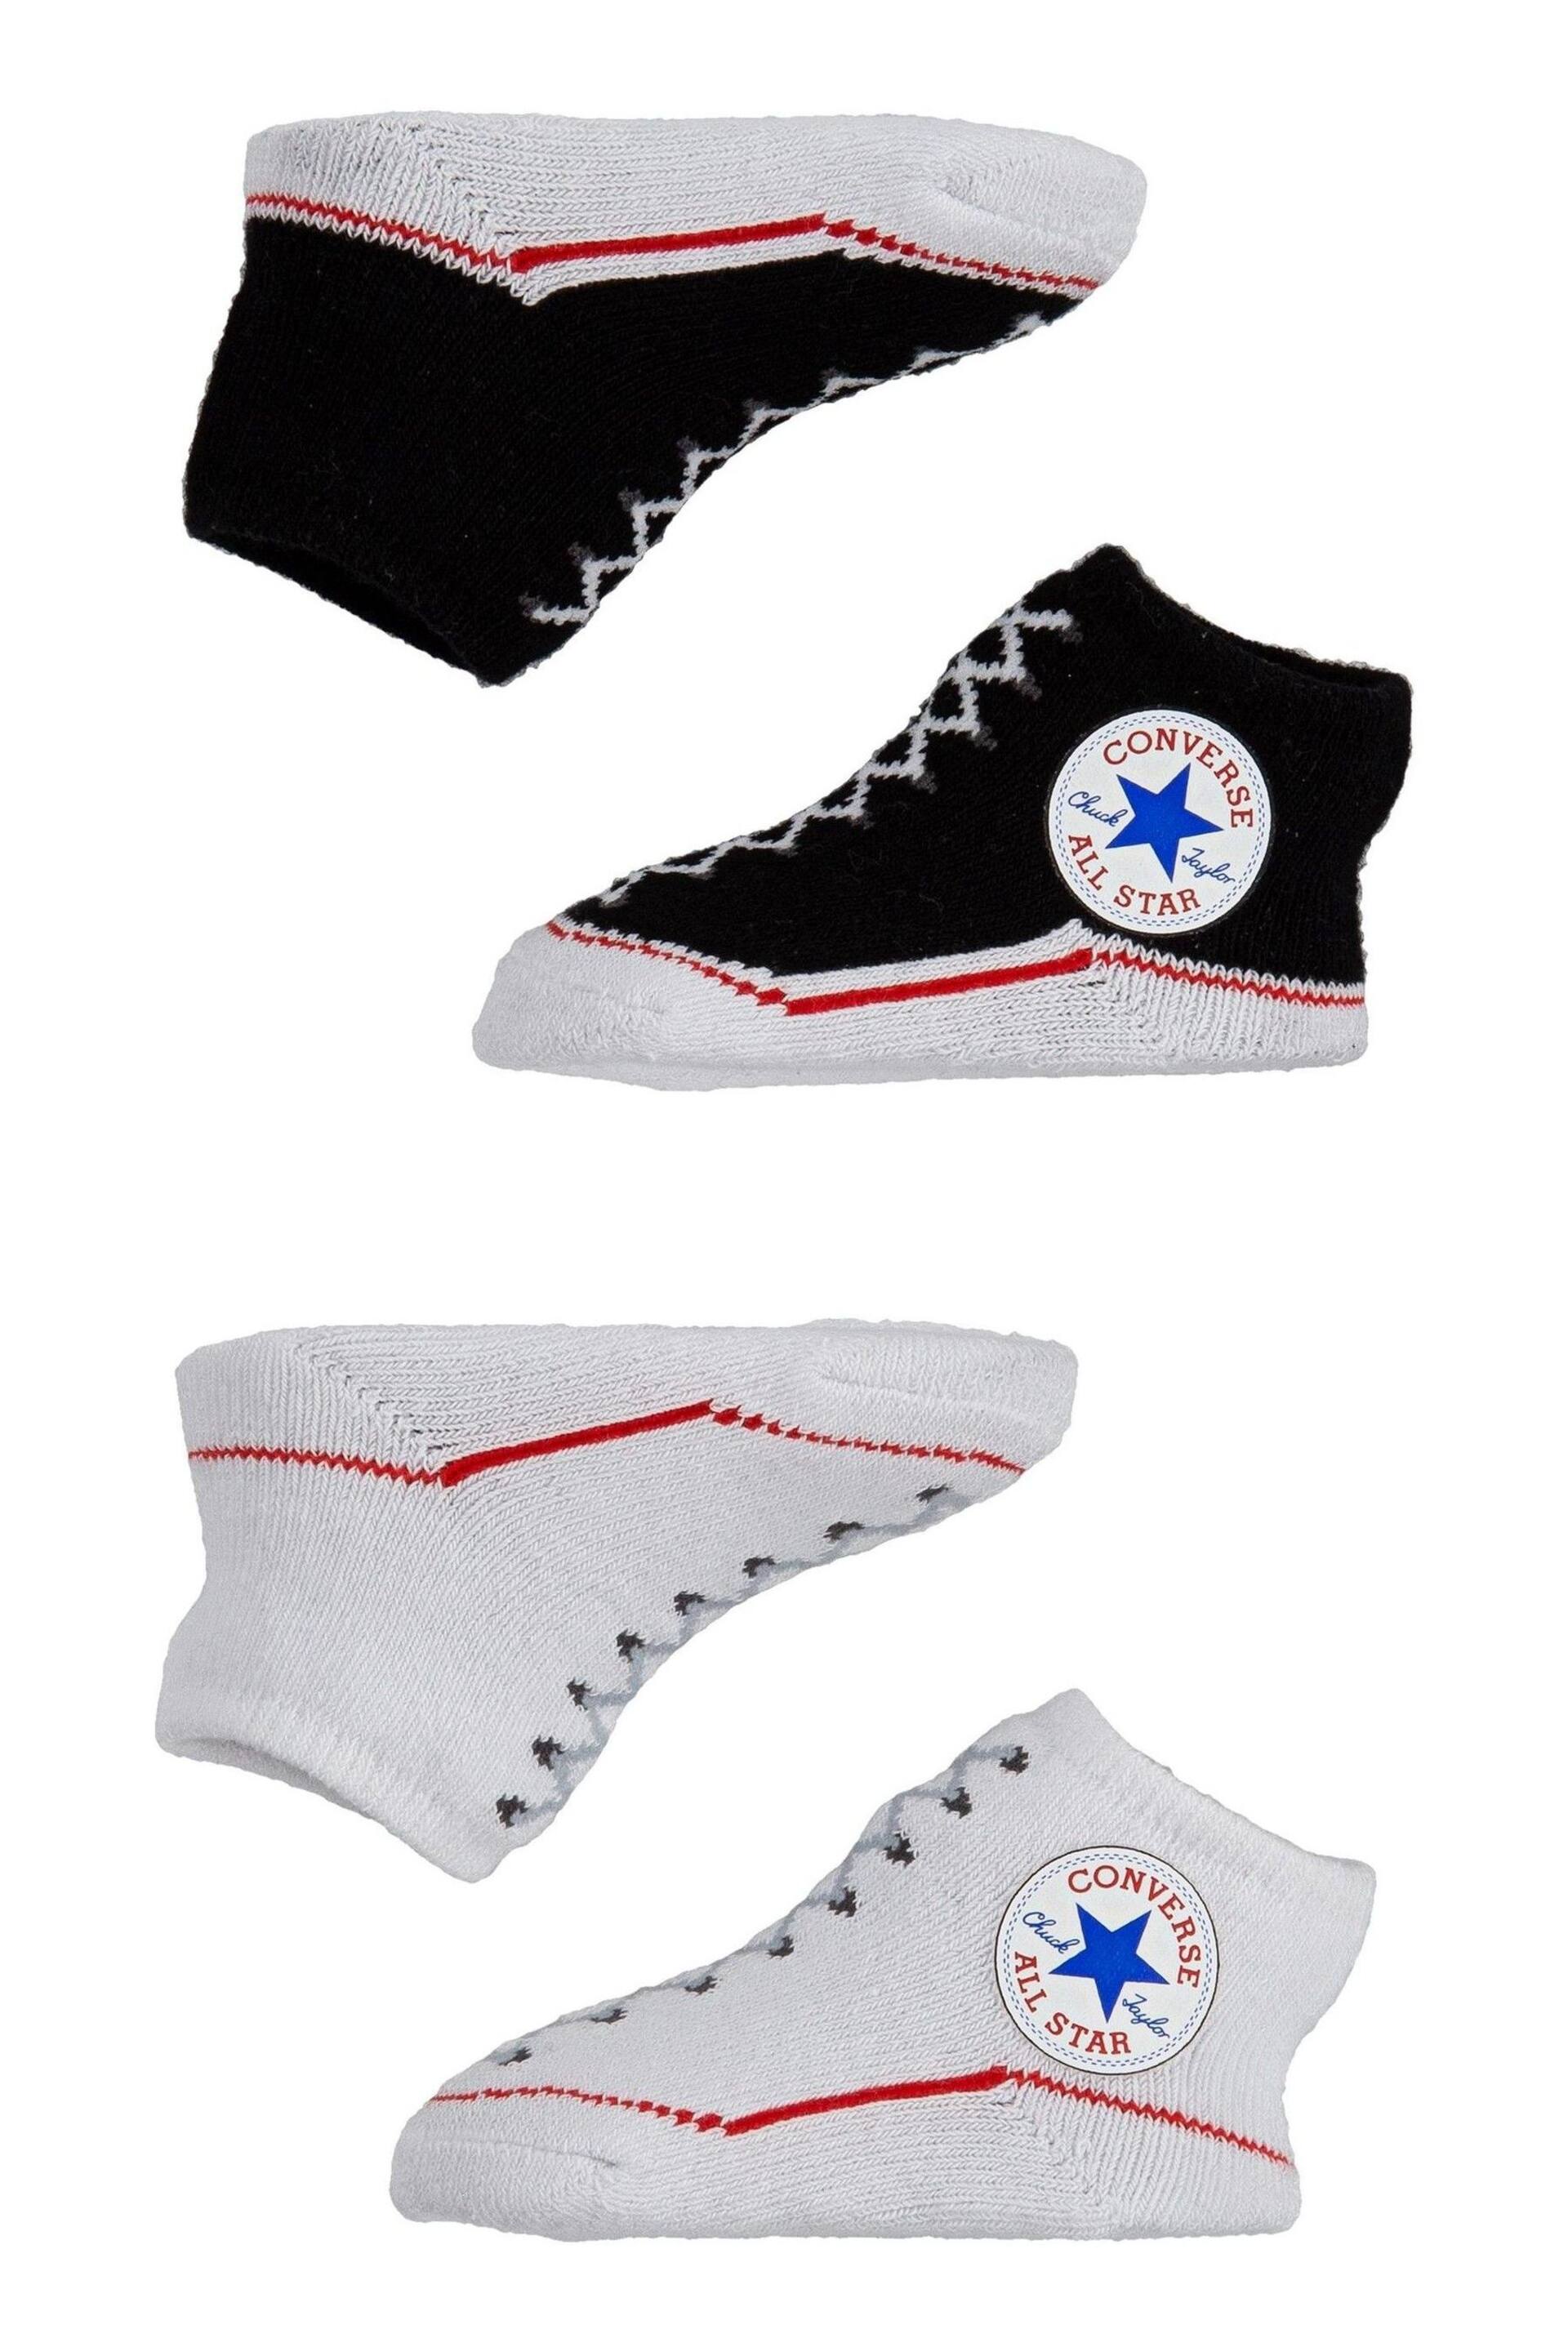 Converse Black Chuck Booties 2 Pack - Image 2 of 3